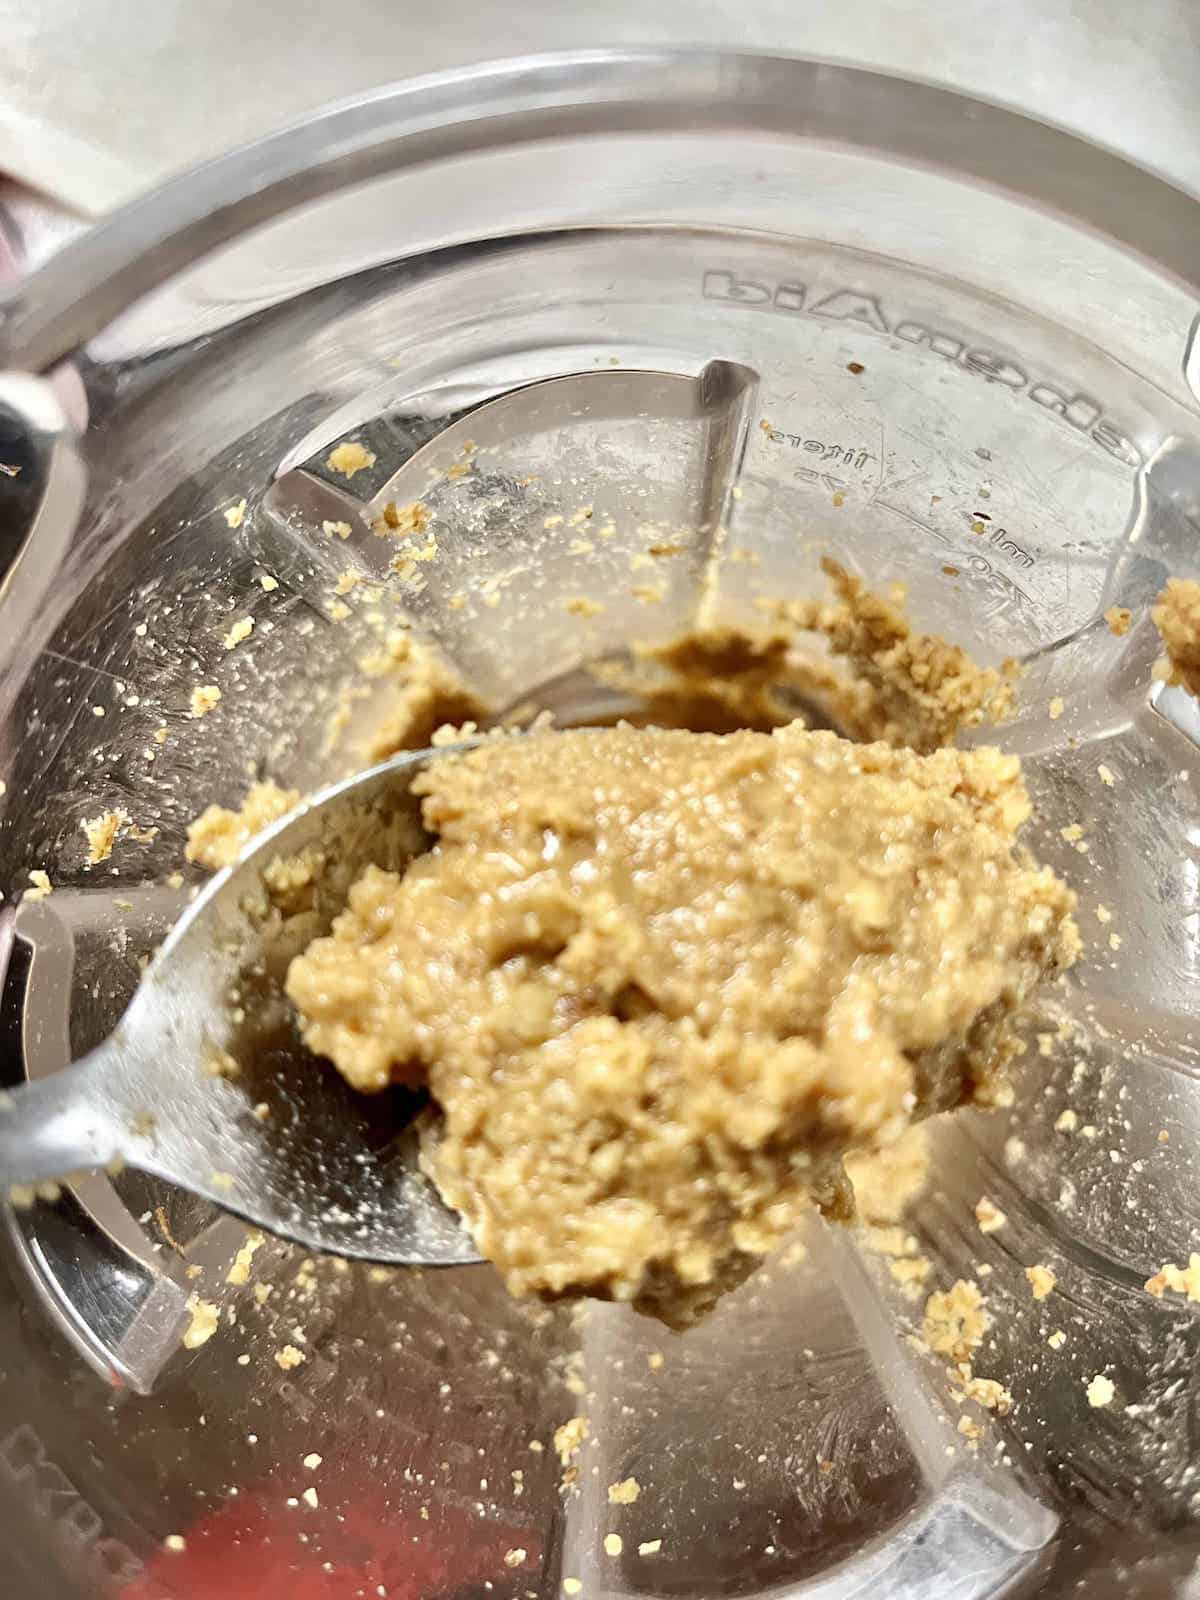 Close-up of over-blended peanut powder which has turned into peanut butter.